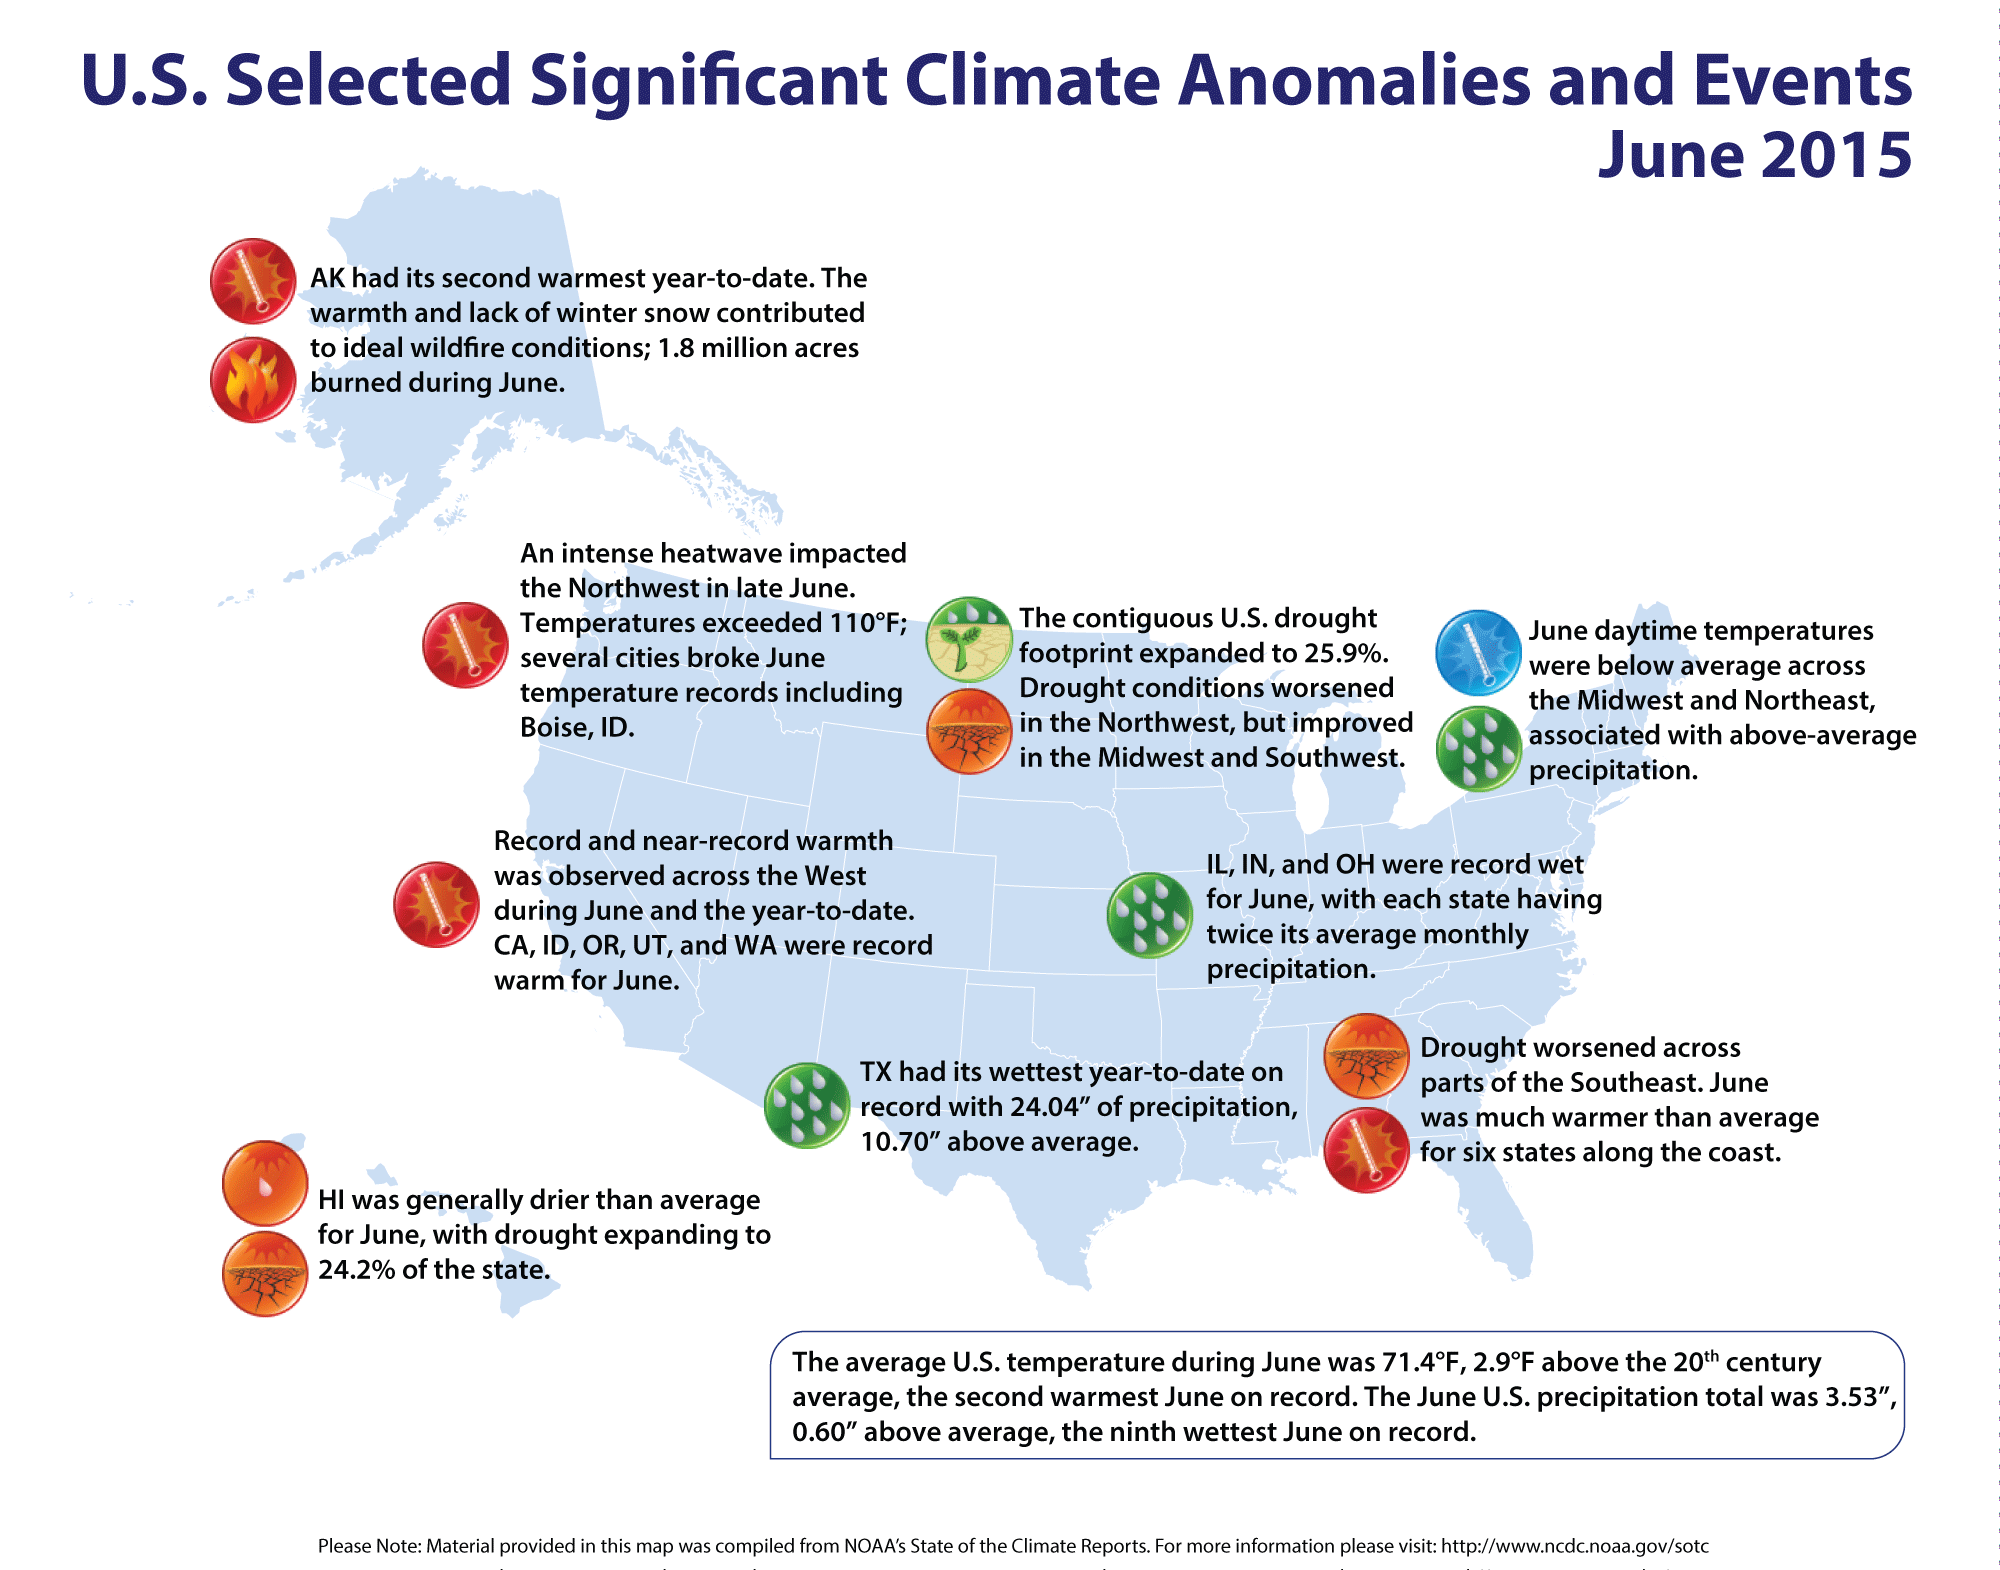 Significant U.S. Climate Events for June 2015